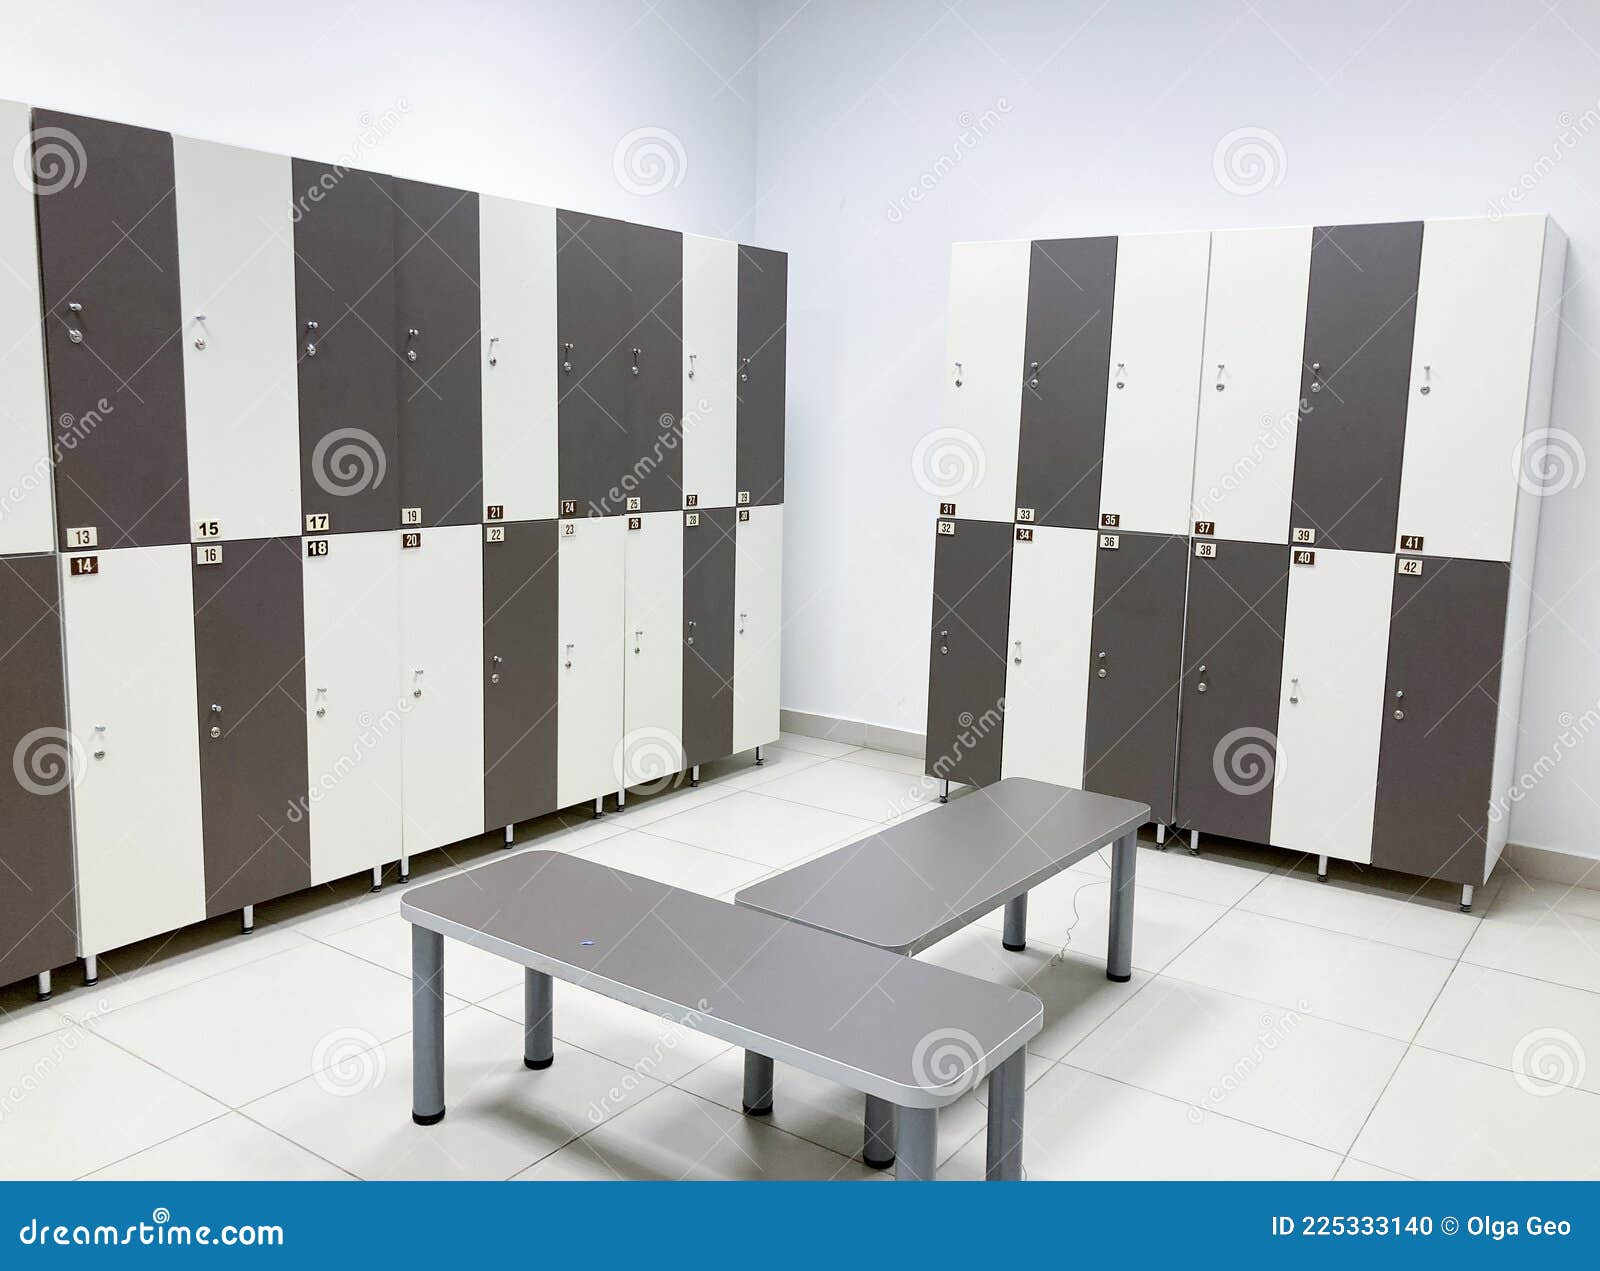 https://thumbs.dreamstime.com/z/fitness-center-locker-room-lockers-along-bathroom-belongings-bench-business-cabinet-change-clean-closet-clothes-clothing-225333140.jpg